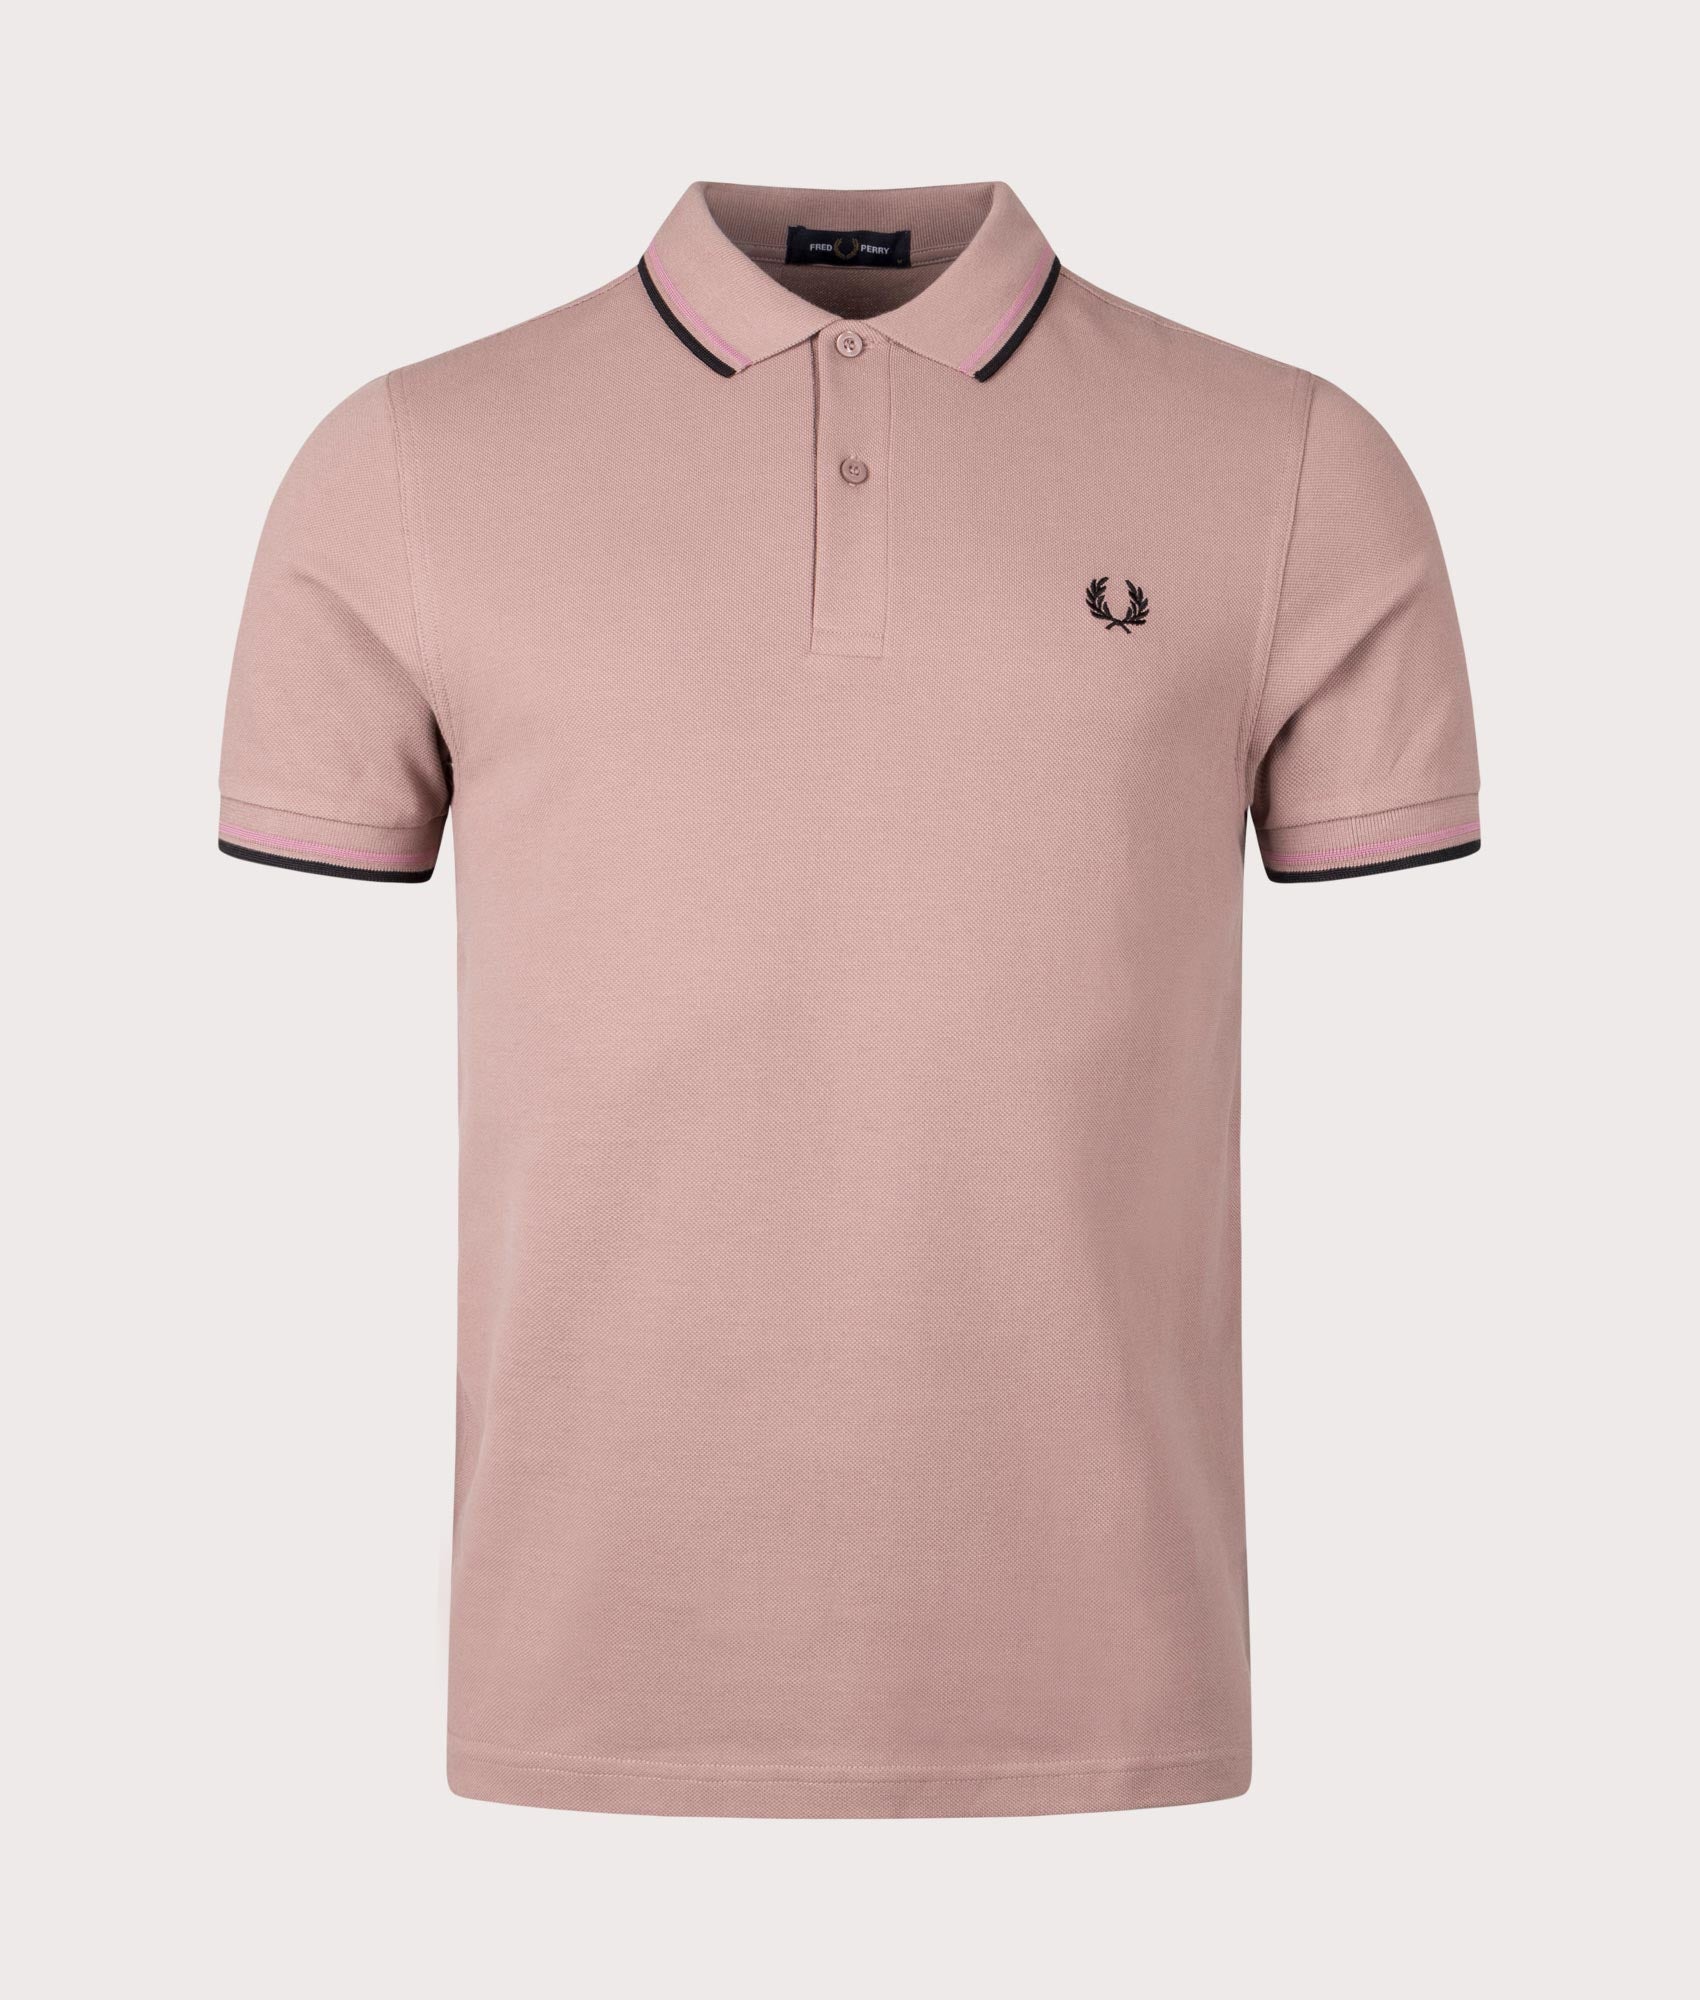 Fred Perry Mens Twin Tipped Polo Shirt - Colour: U89 Dark Pink/Dusty Rose/Black - Size: Large